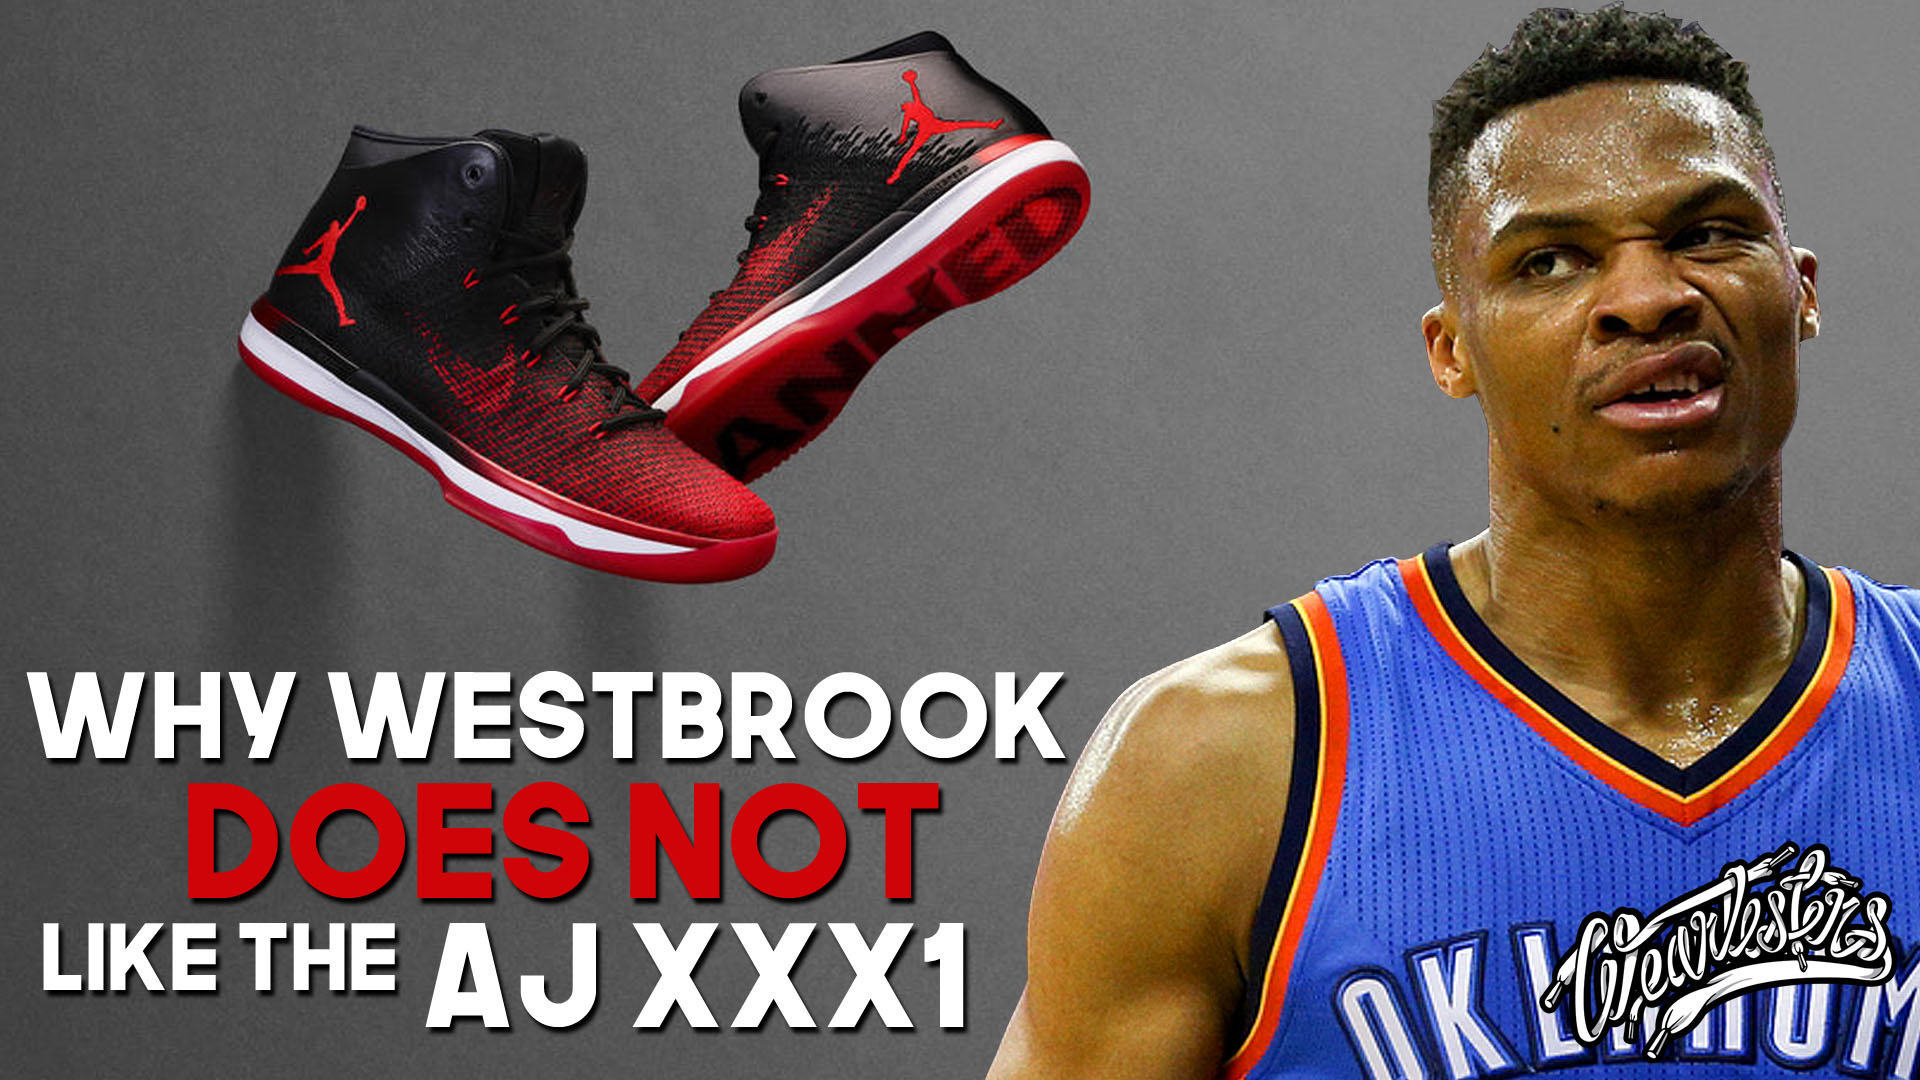 russell westbrook shoes 2017